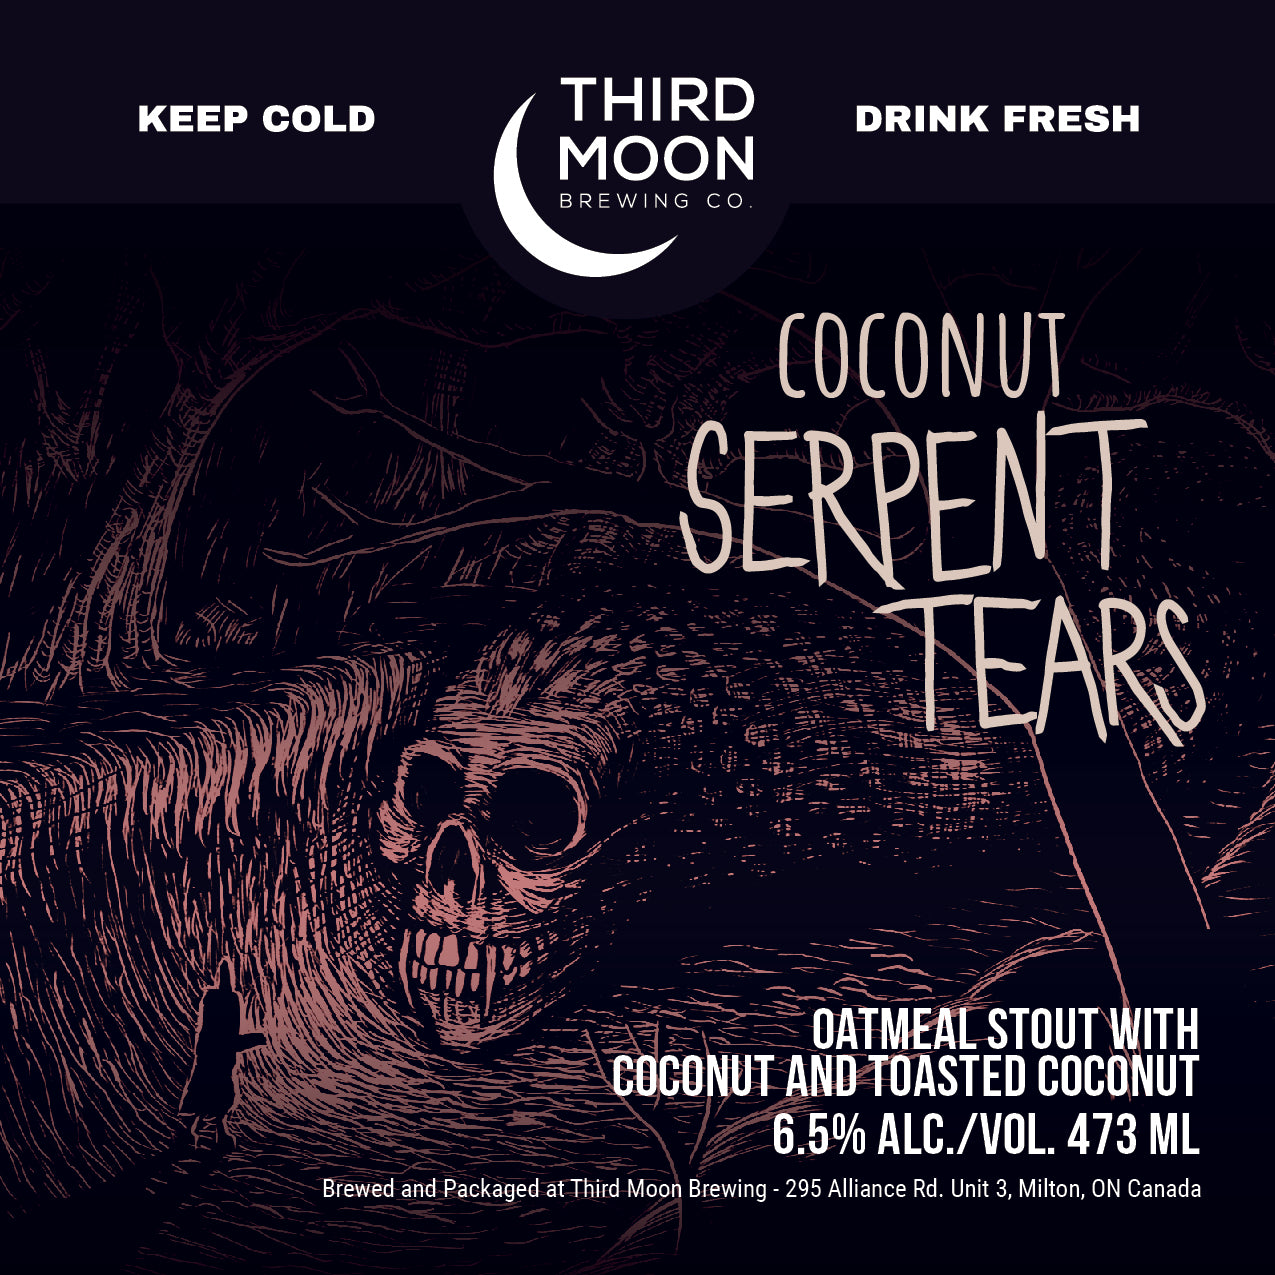 Oatmeal Stout - "Coconut Serpent Tears" tall can